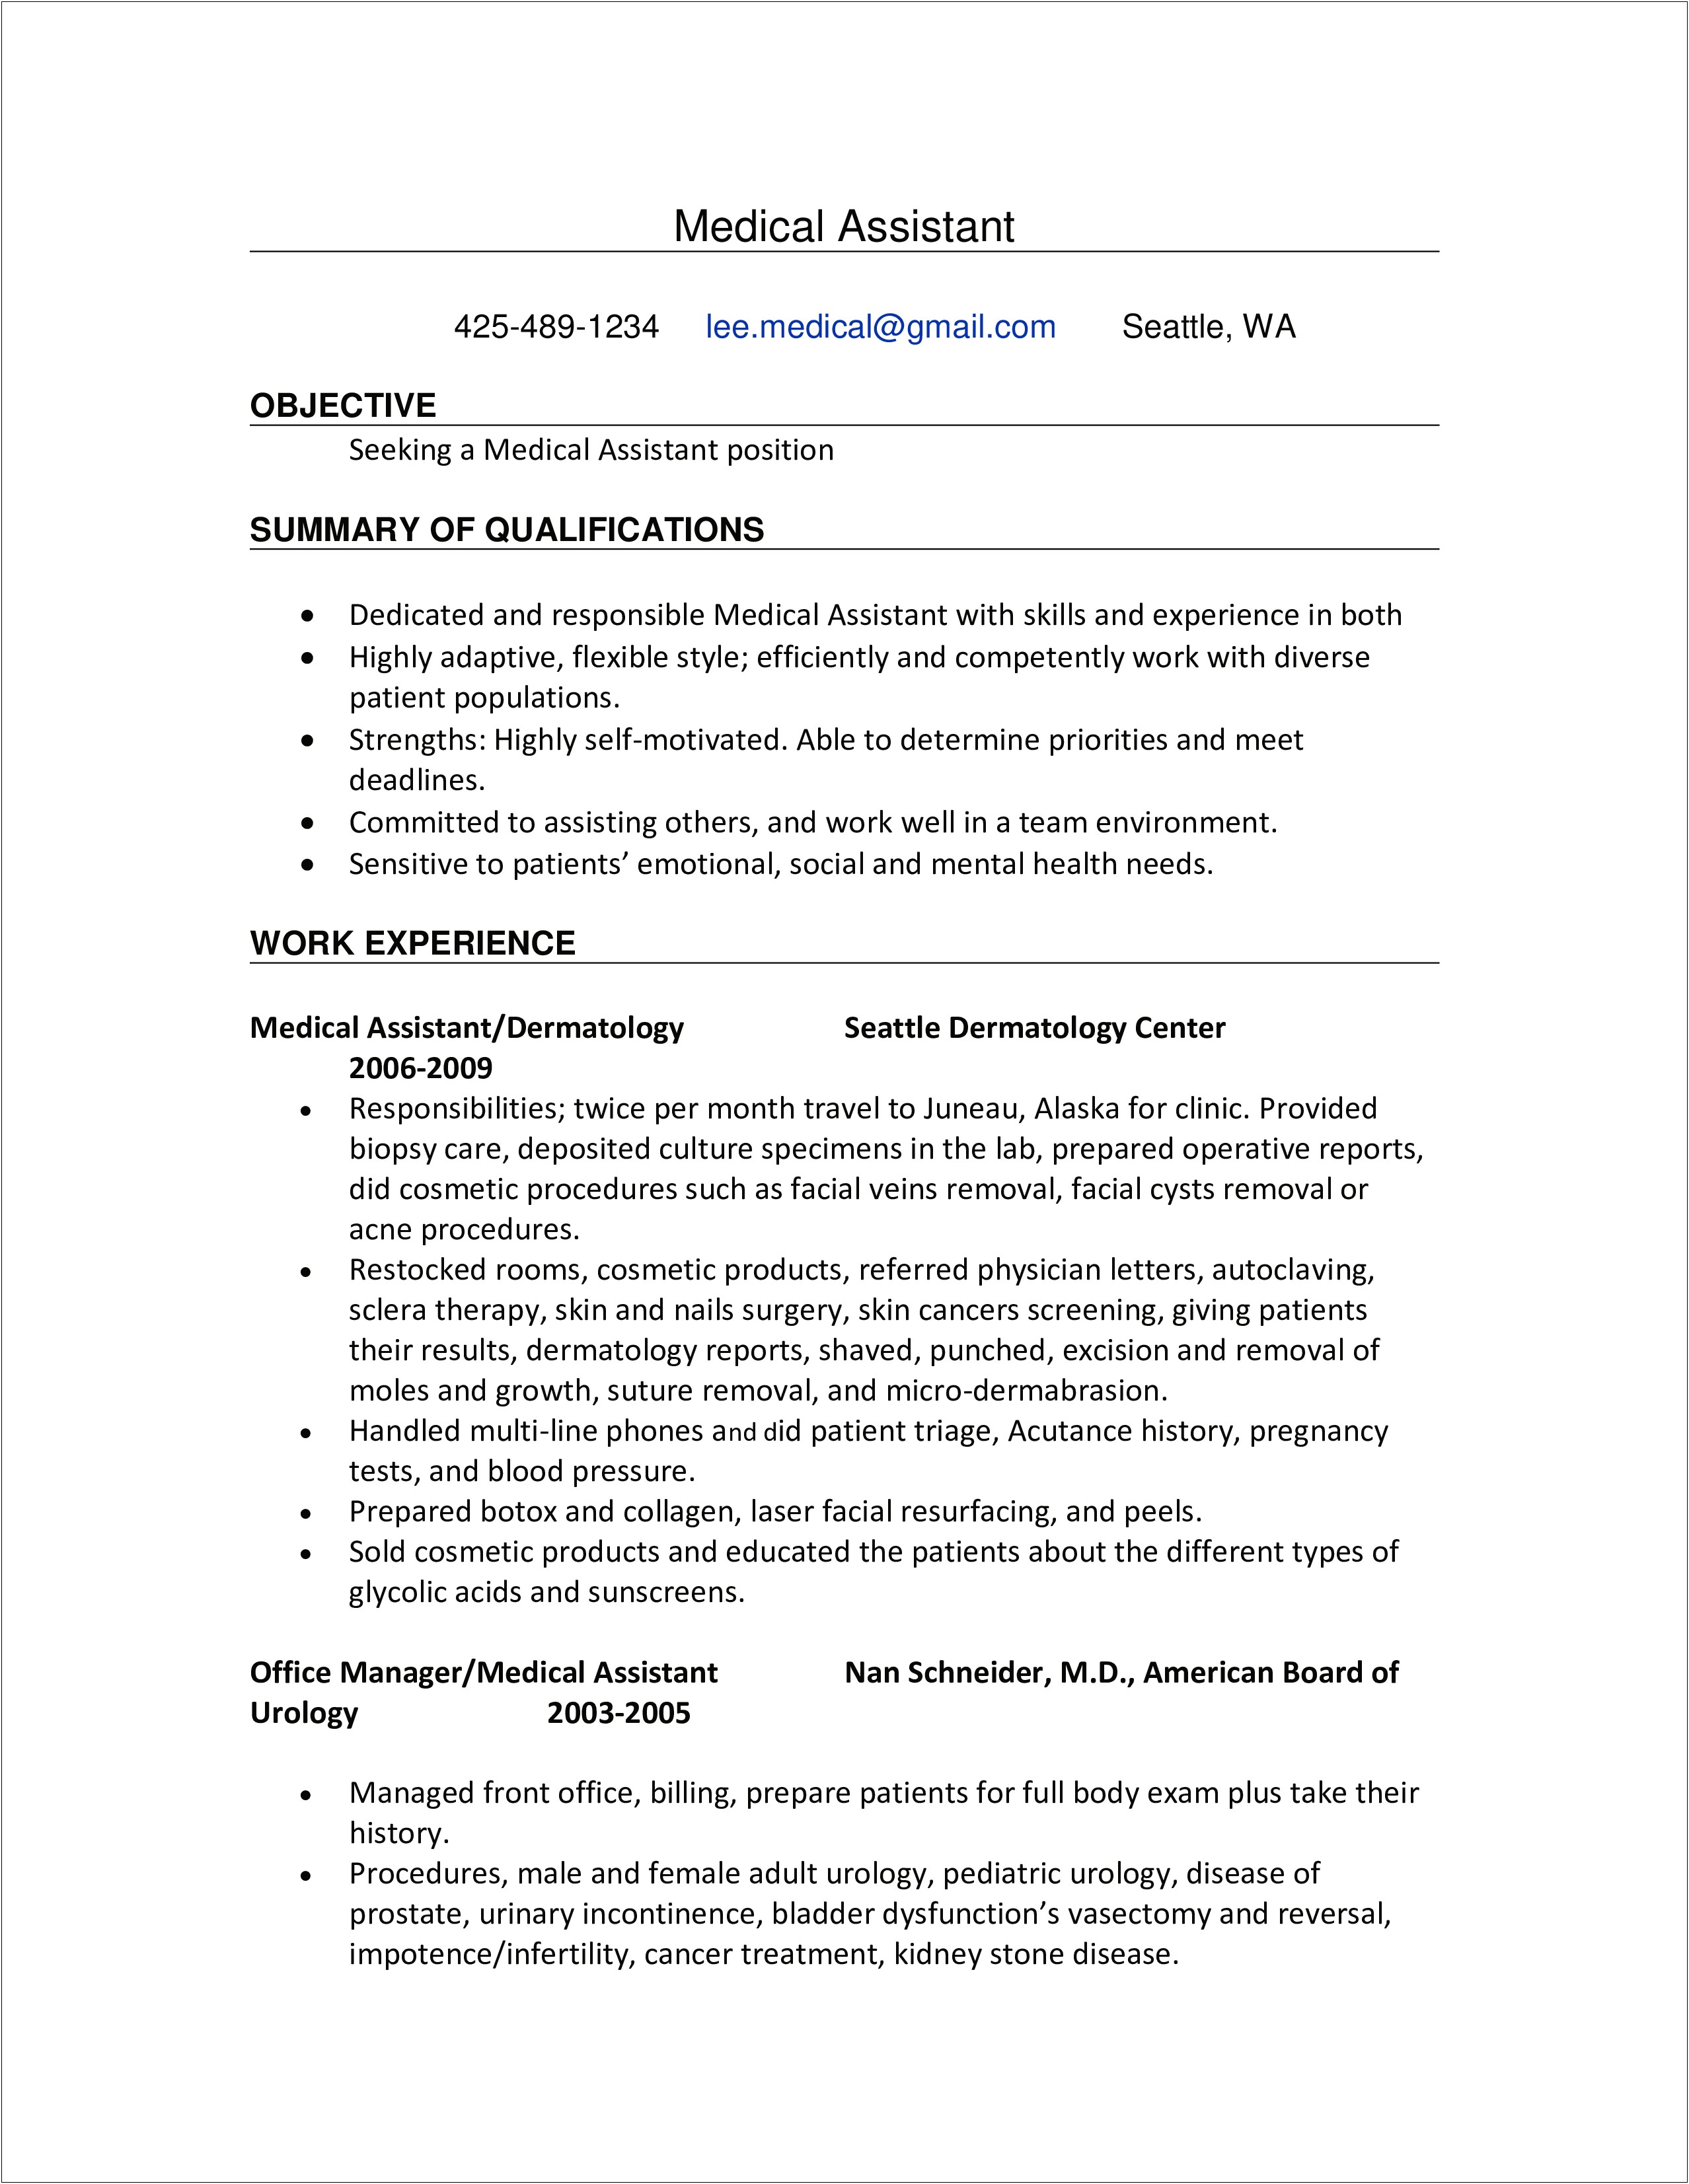 Medical Collections Job Description For Resume